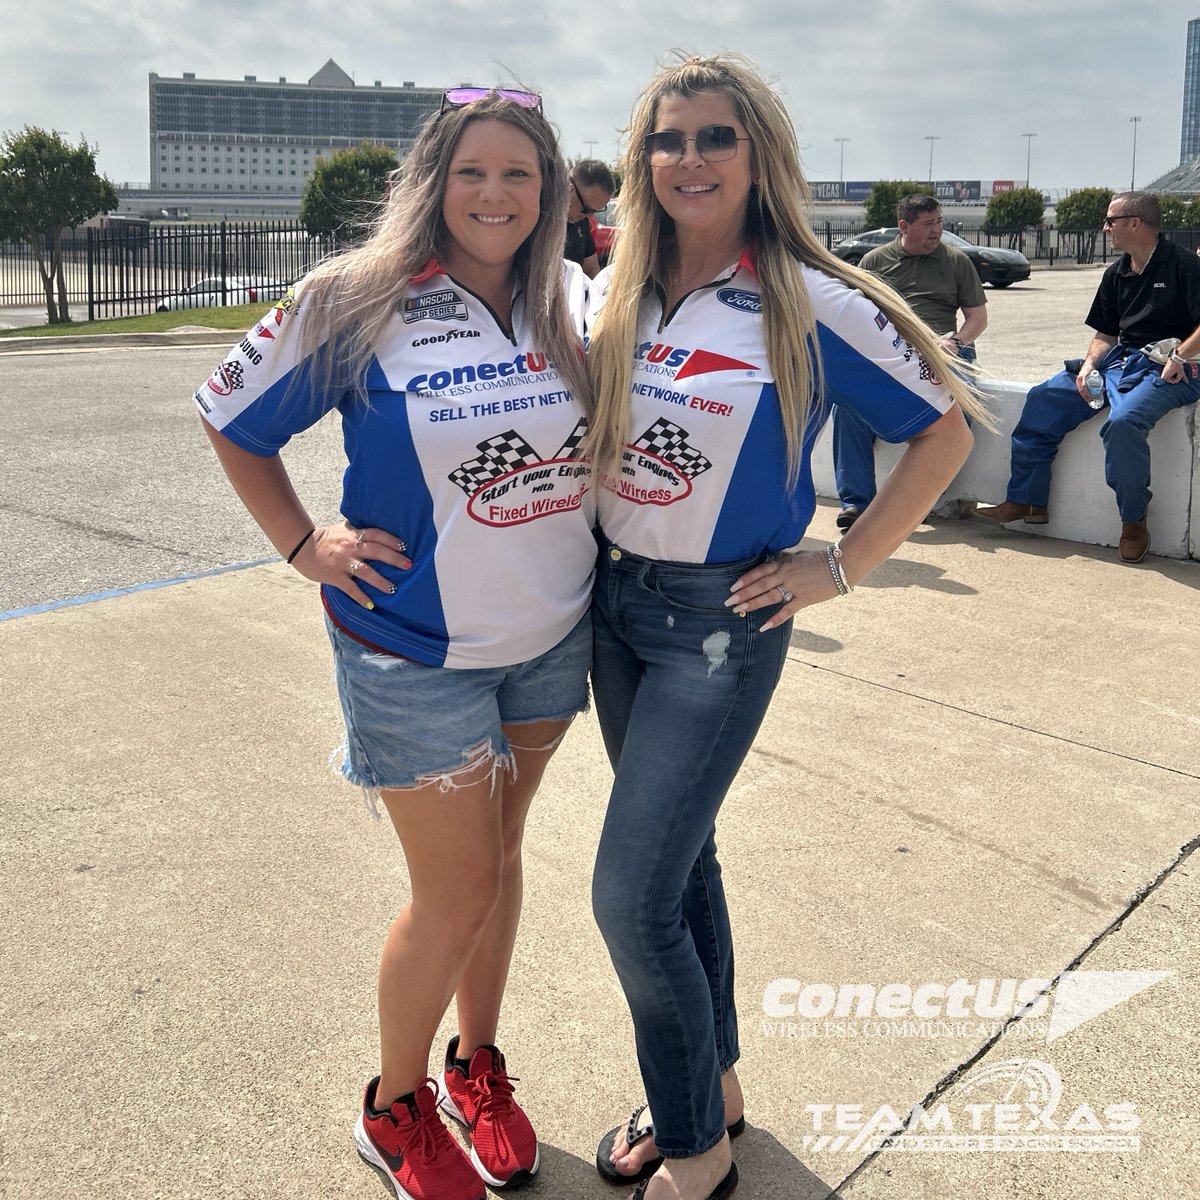 ConectUS Wireless is thankful for our partnership with the Team Texas Racing School, and Kim and Brandi have been a huge help for us through it all! These two give their heart to this partnership and we’re grateful to have them on our team! @TeamTXDrivin